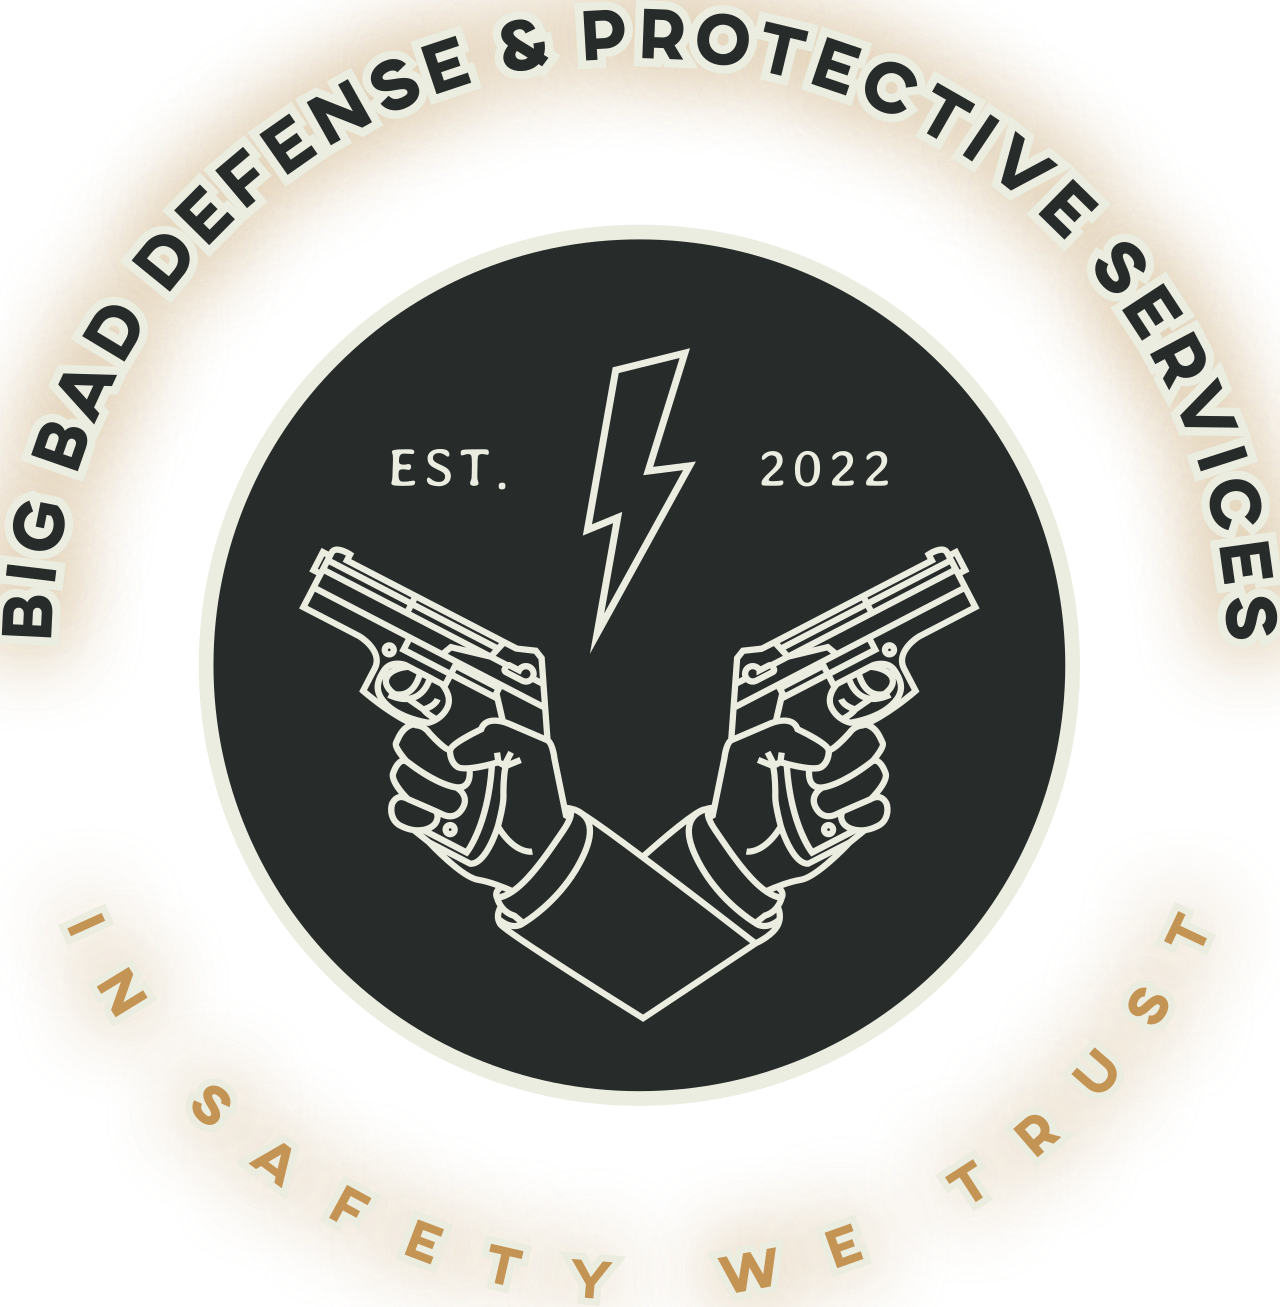 Big Bad Defense and Protective Services's web page